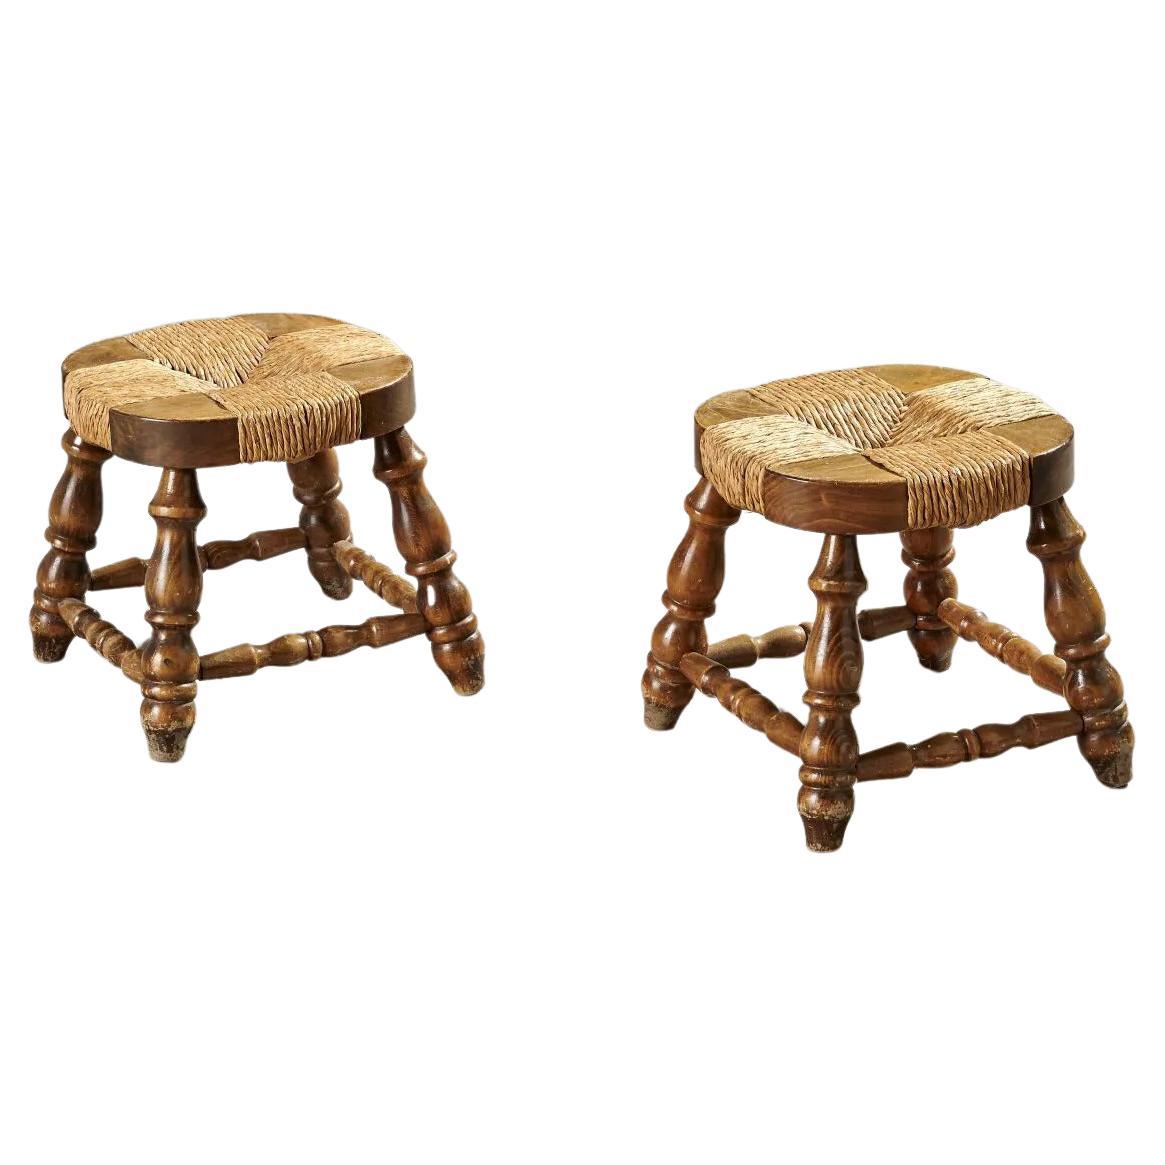 Pair of Wooden and Straw Stools circa 1950/1960